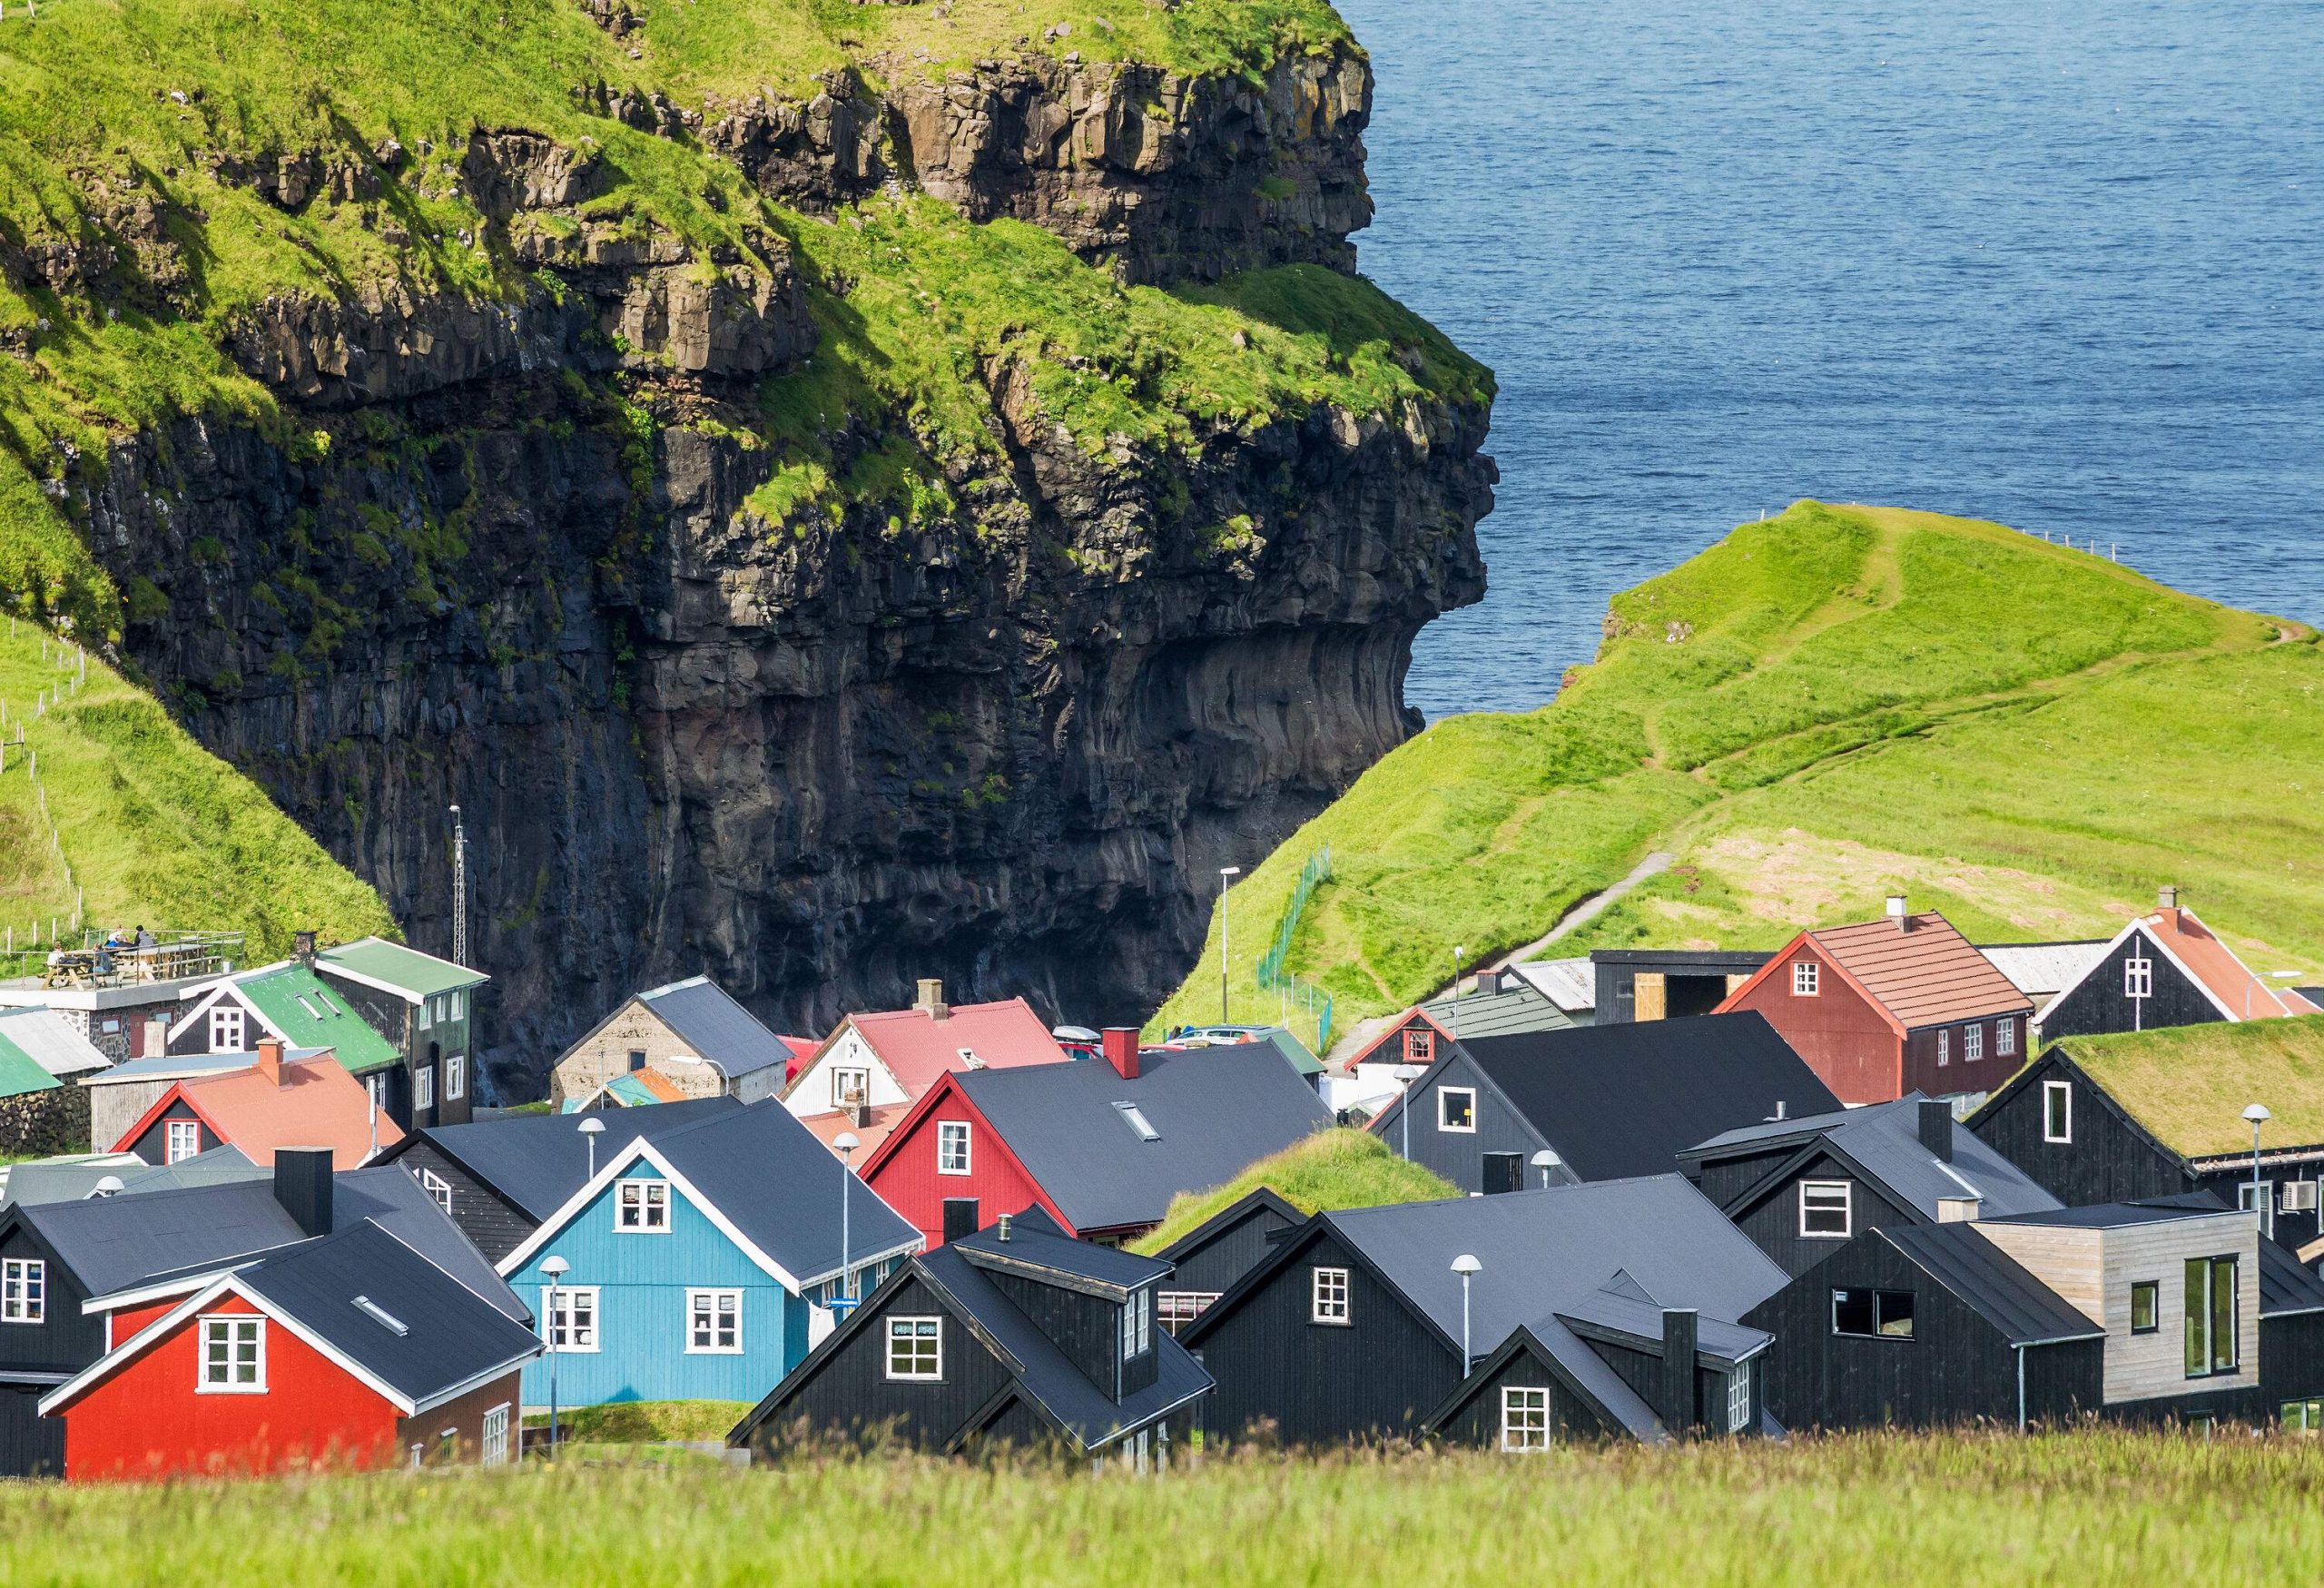 A small village with a cluster of colourful houses lies at the edge of a lush gorge overlooking the sea.